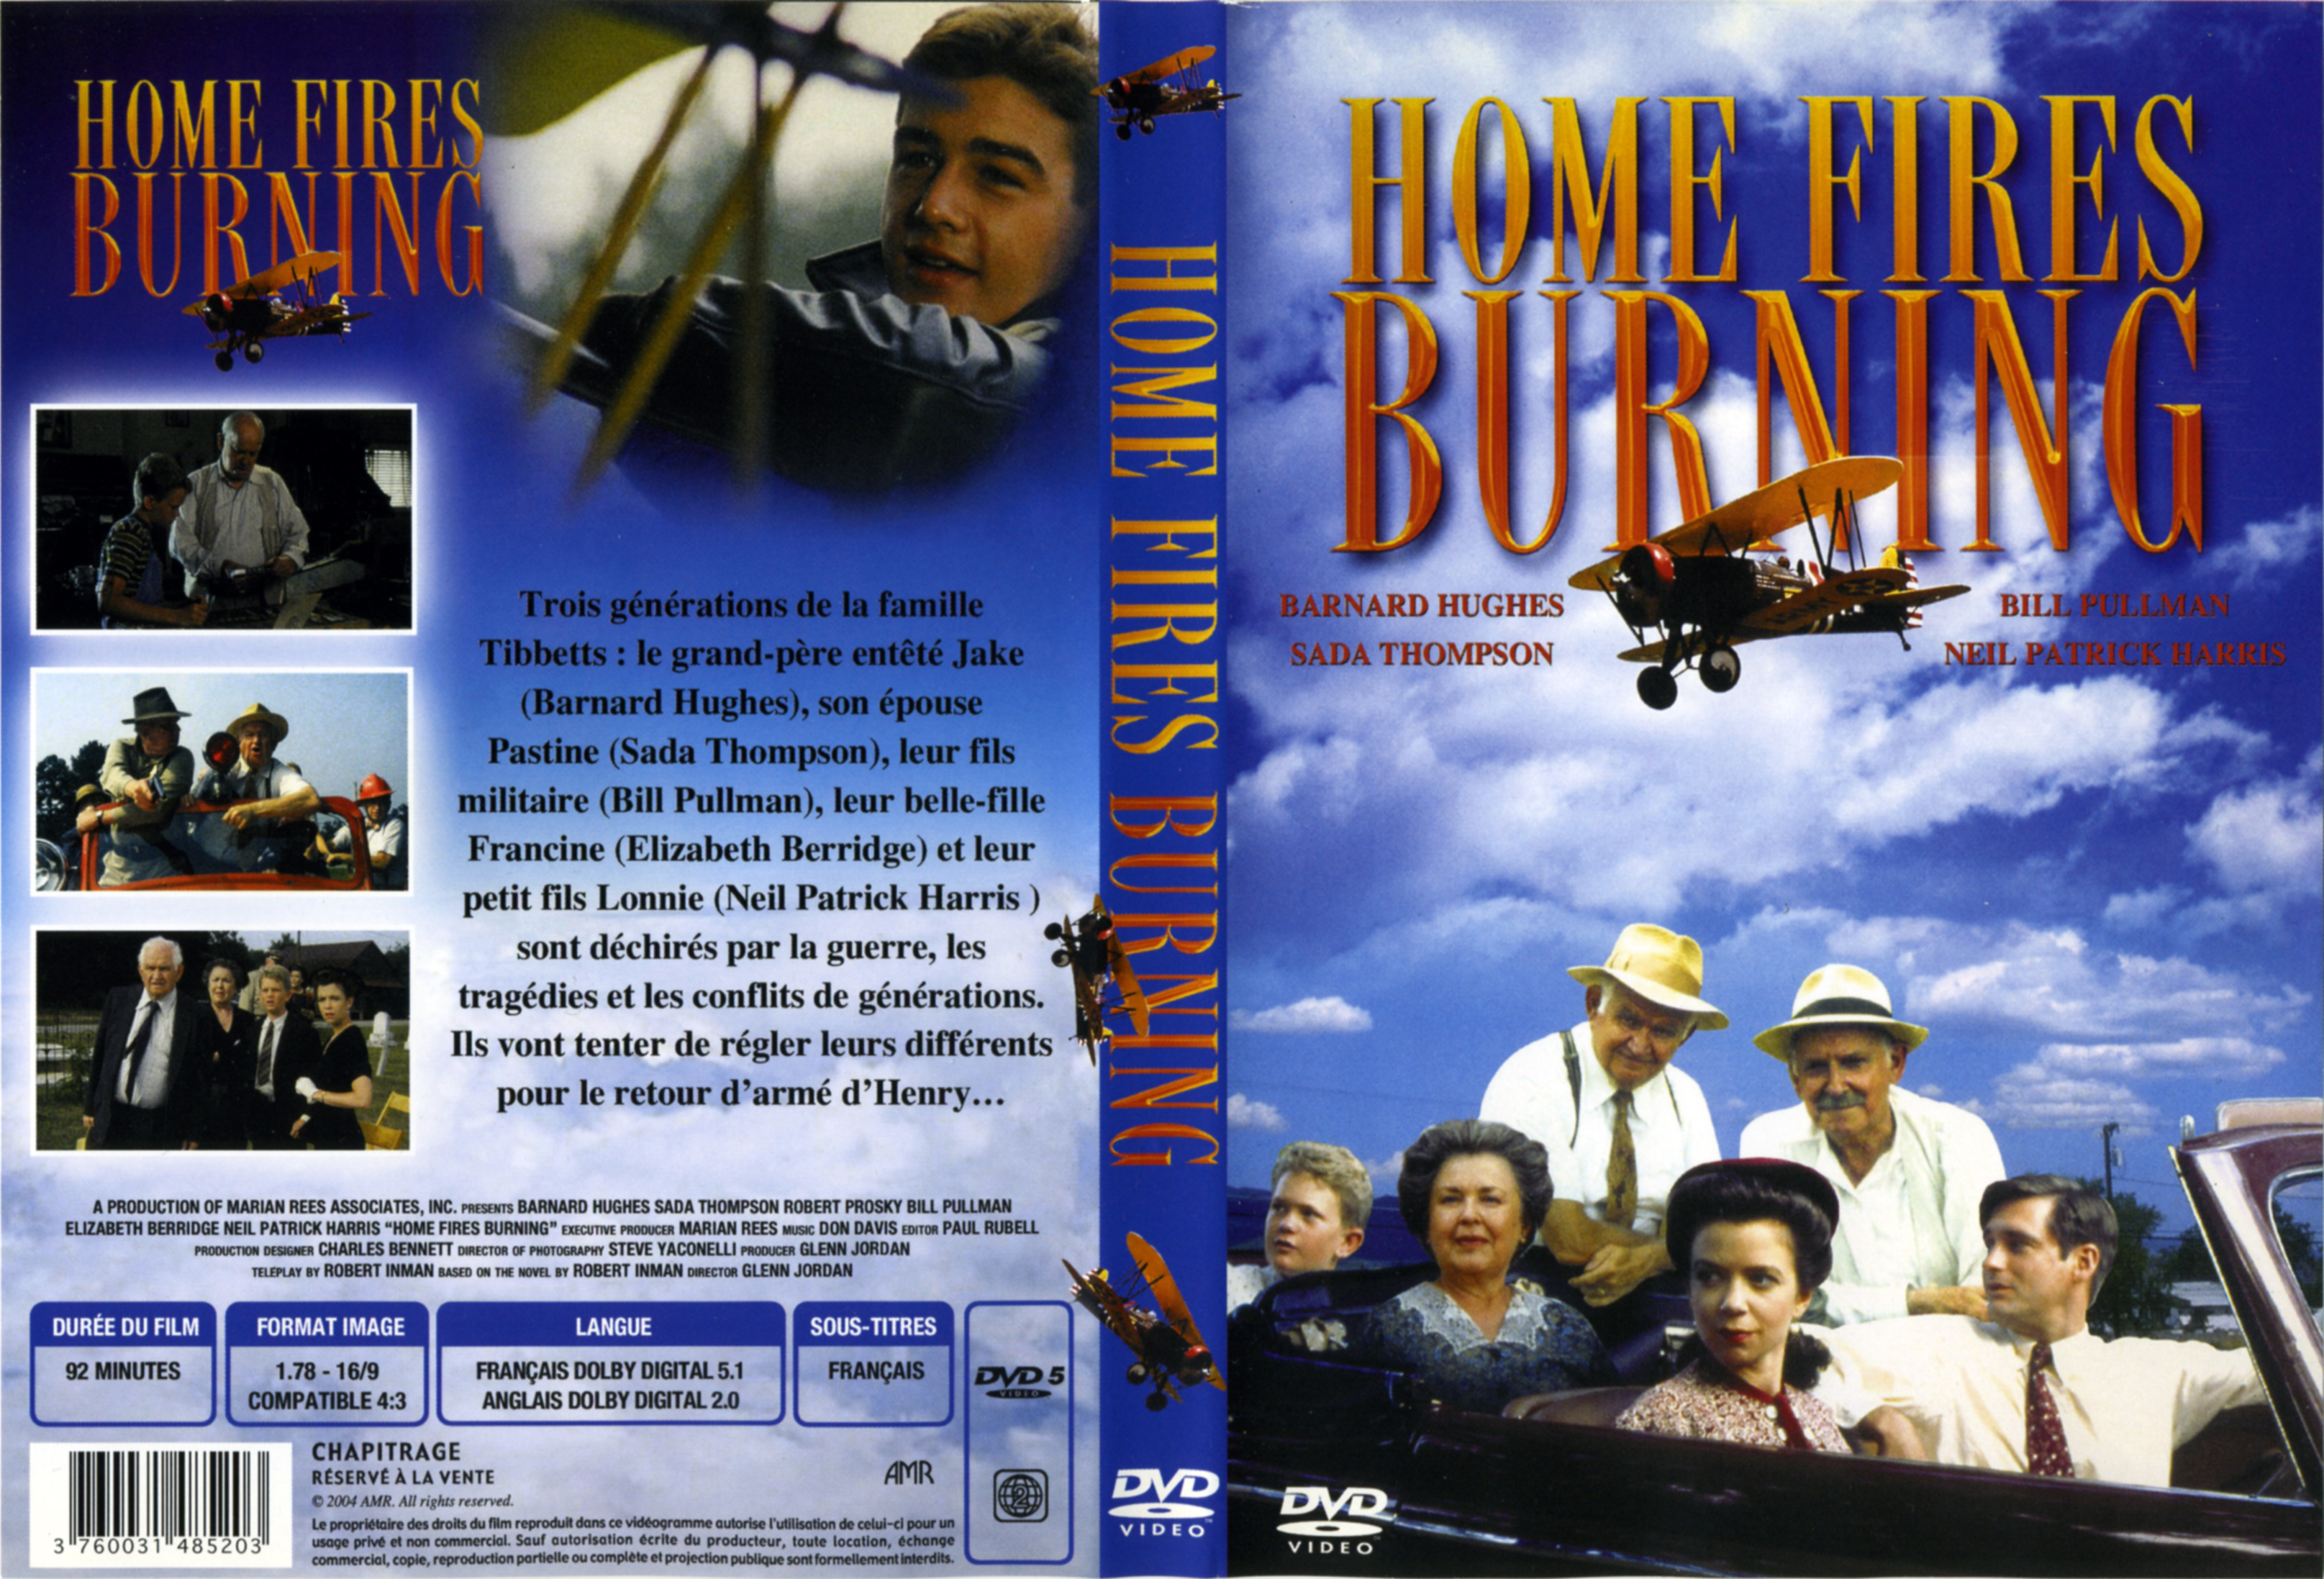 Jaquette DVD Home fires burning